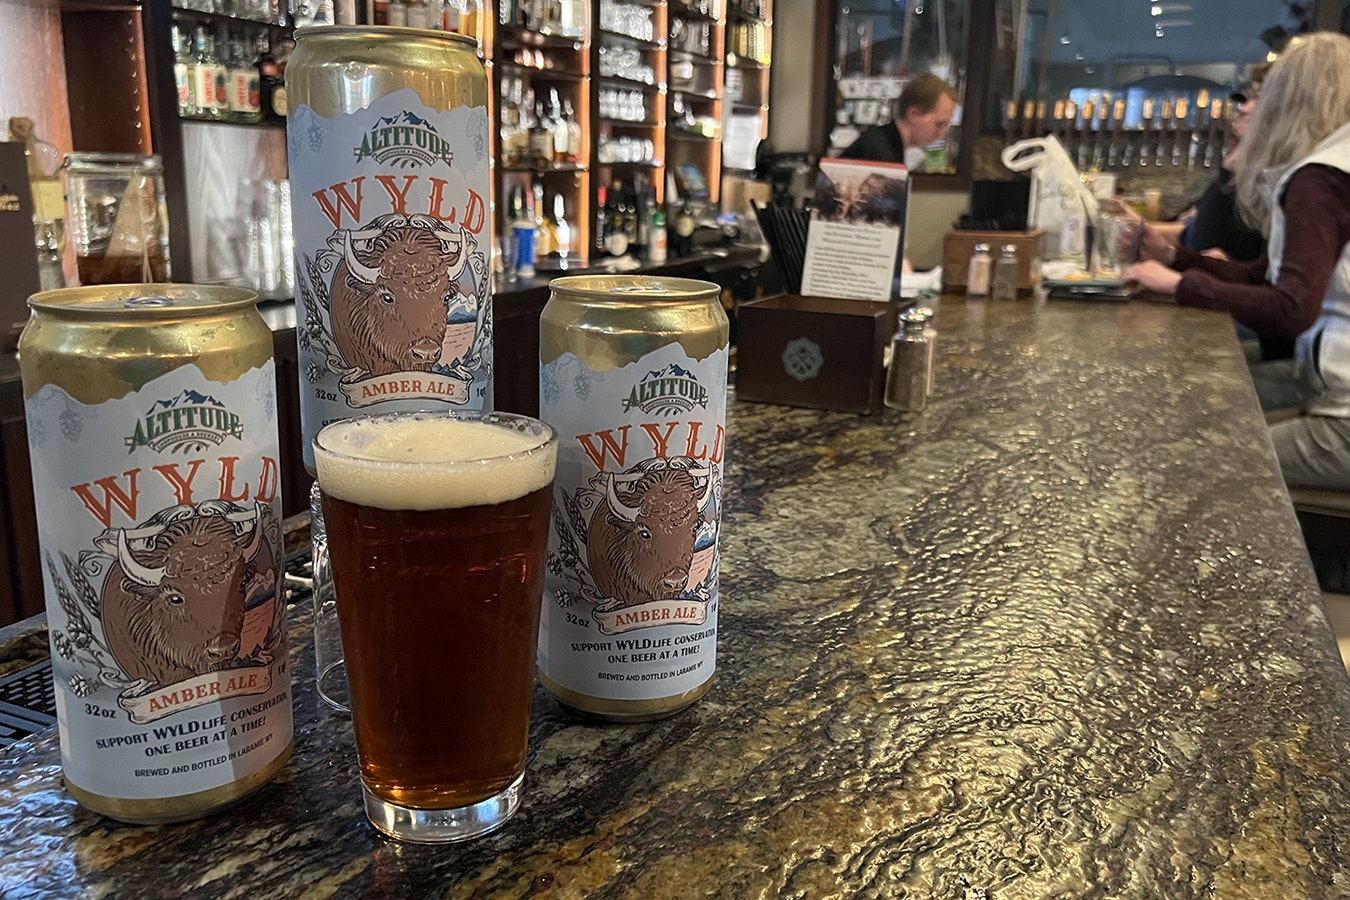 Wyld Amber Ale created in Laramie at Altitude Chophouse & Brewery donates a portion of sales to support Cowboy State wildlife.